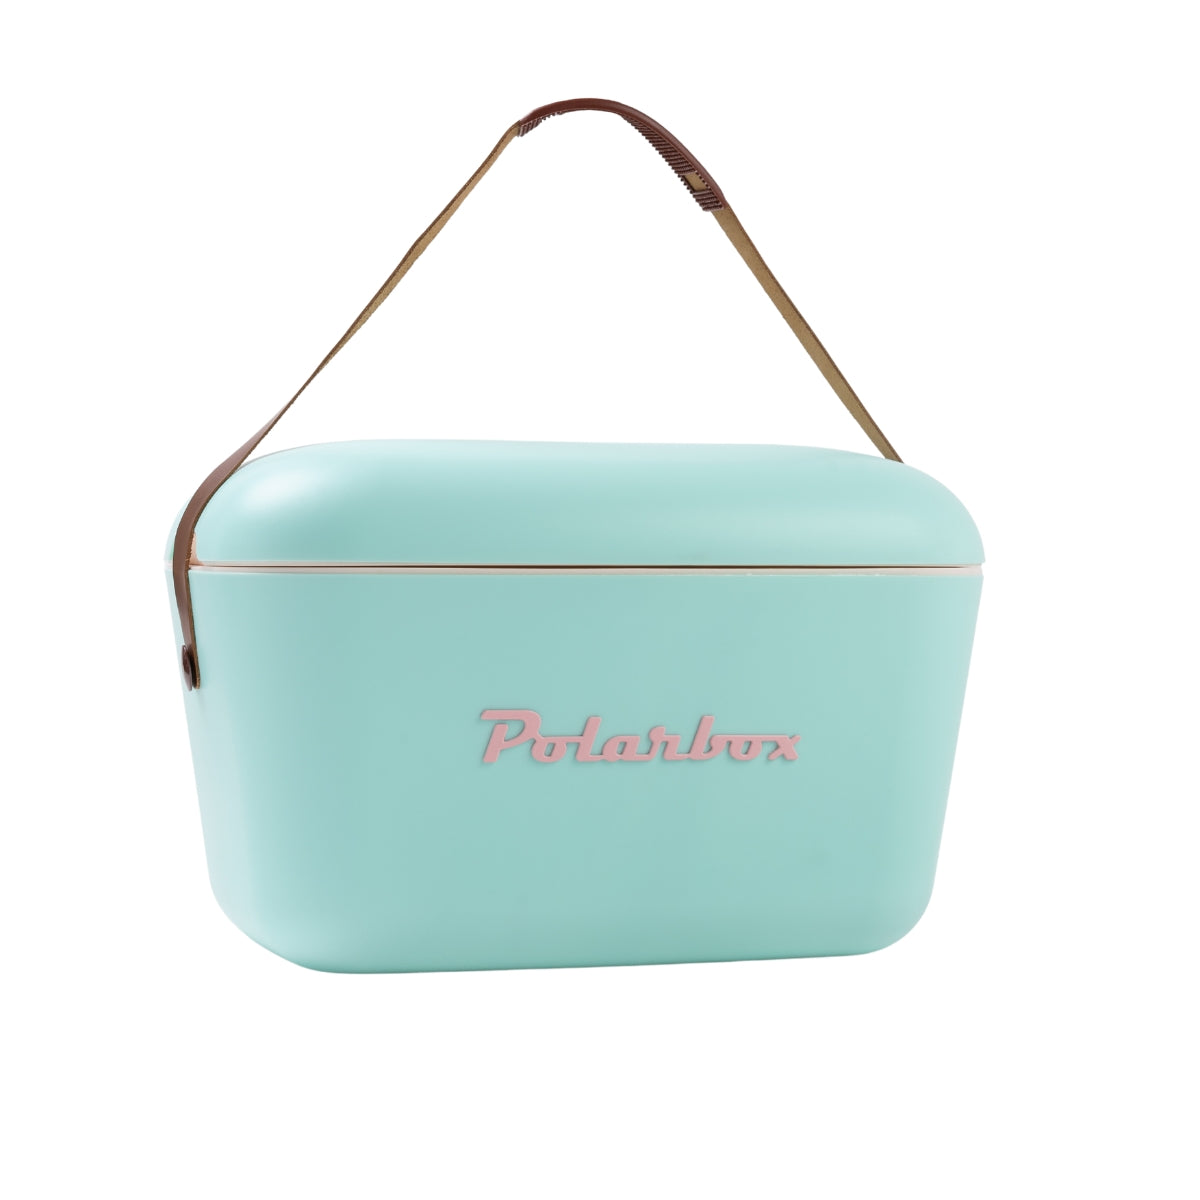 20 Liters Classic Cooler Box Cyan/Baby Rose - Polarbox